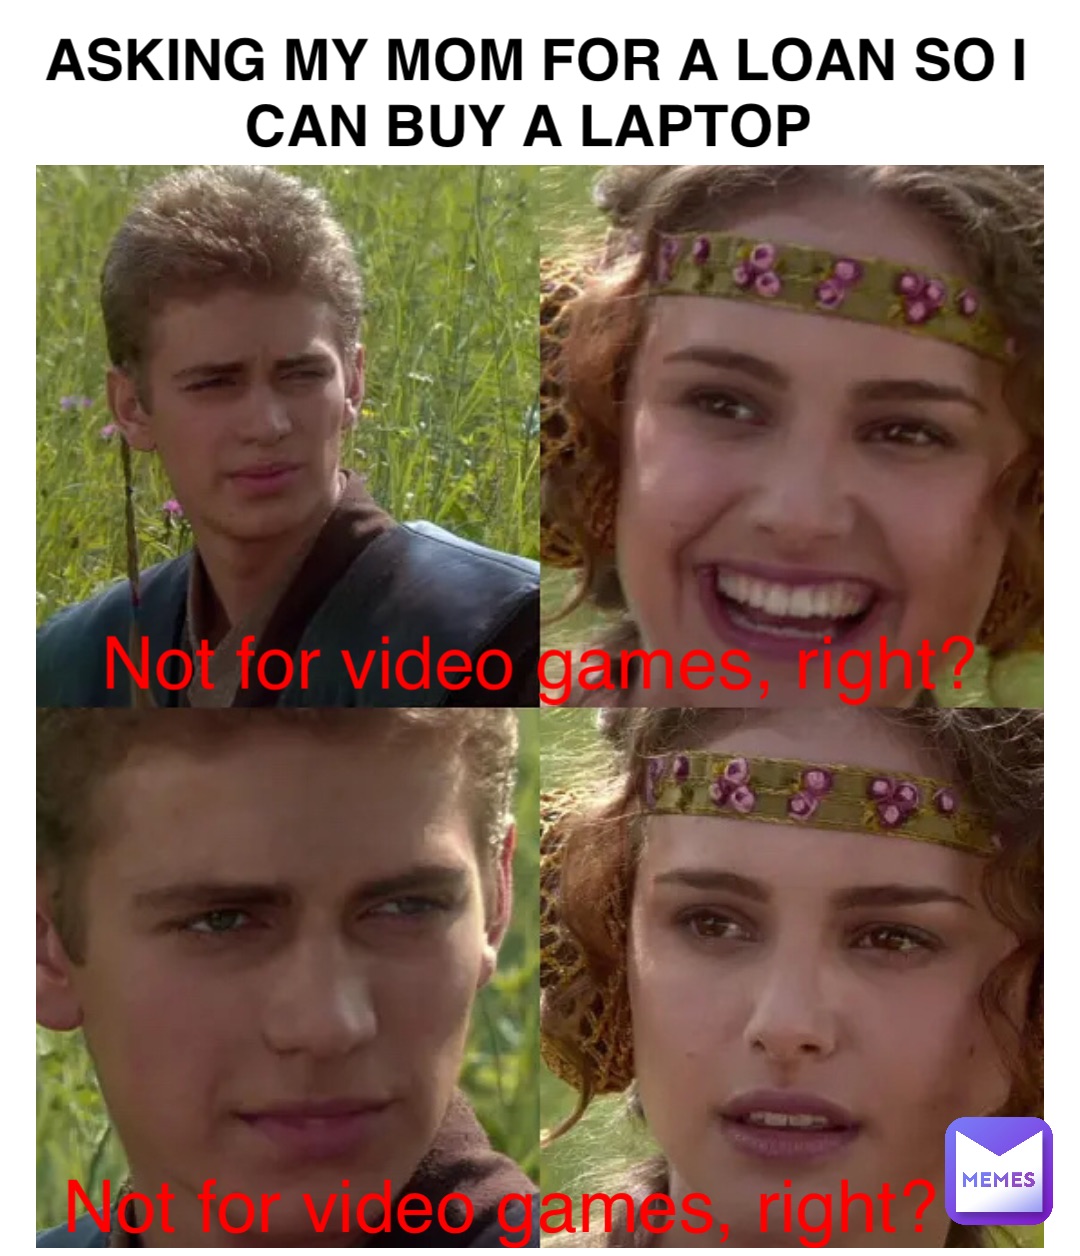 Asking my mom for a loan so I can buy a laptop Not for video games, right? Not for video games, right?